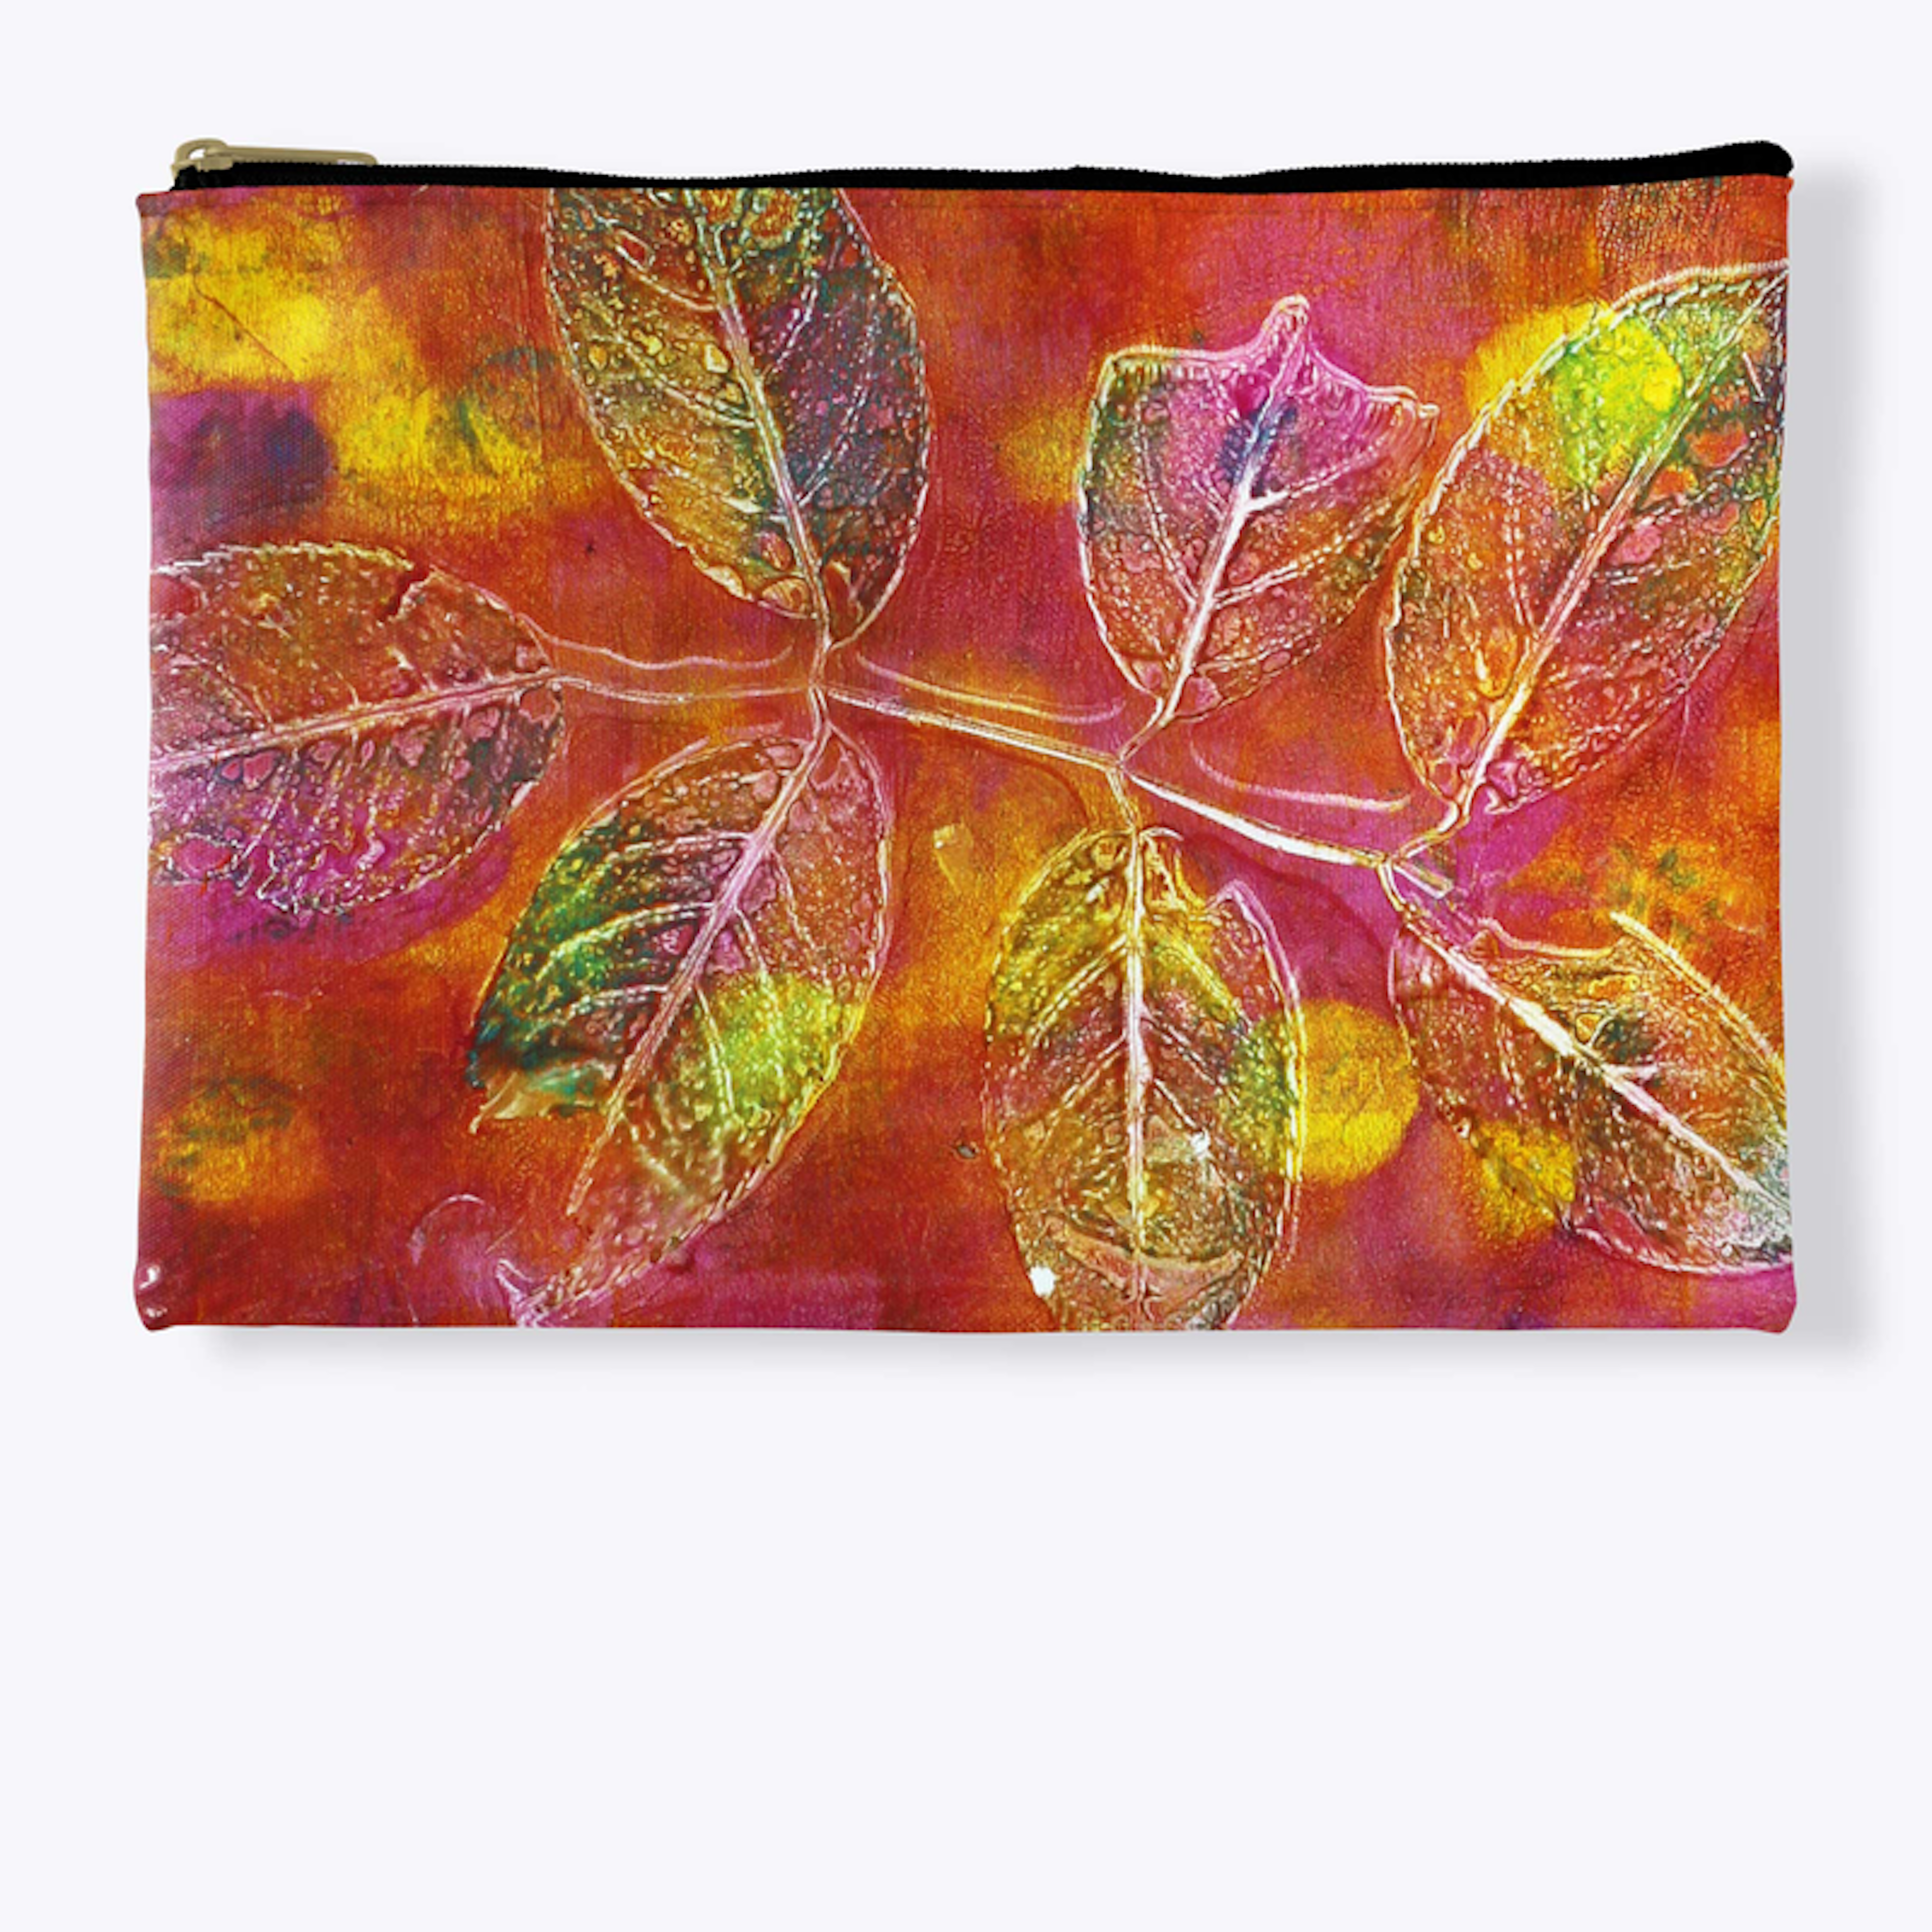 Accessory Pouch Large - Rose Leaves